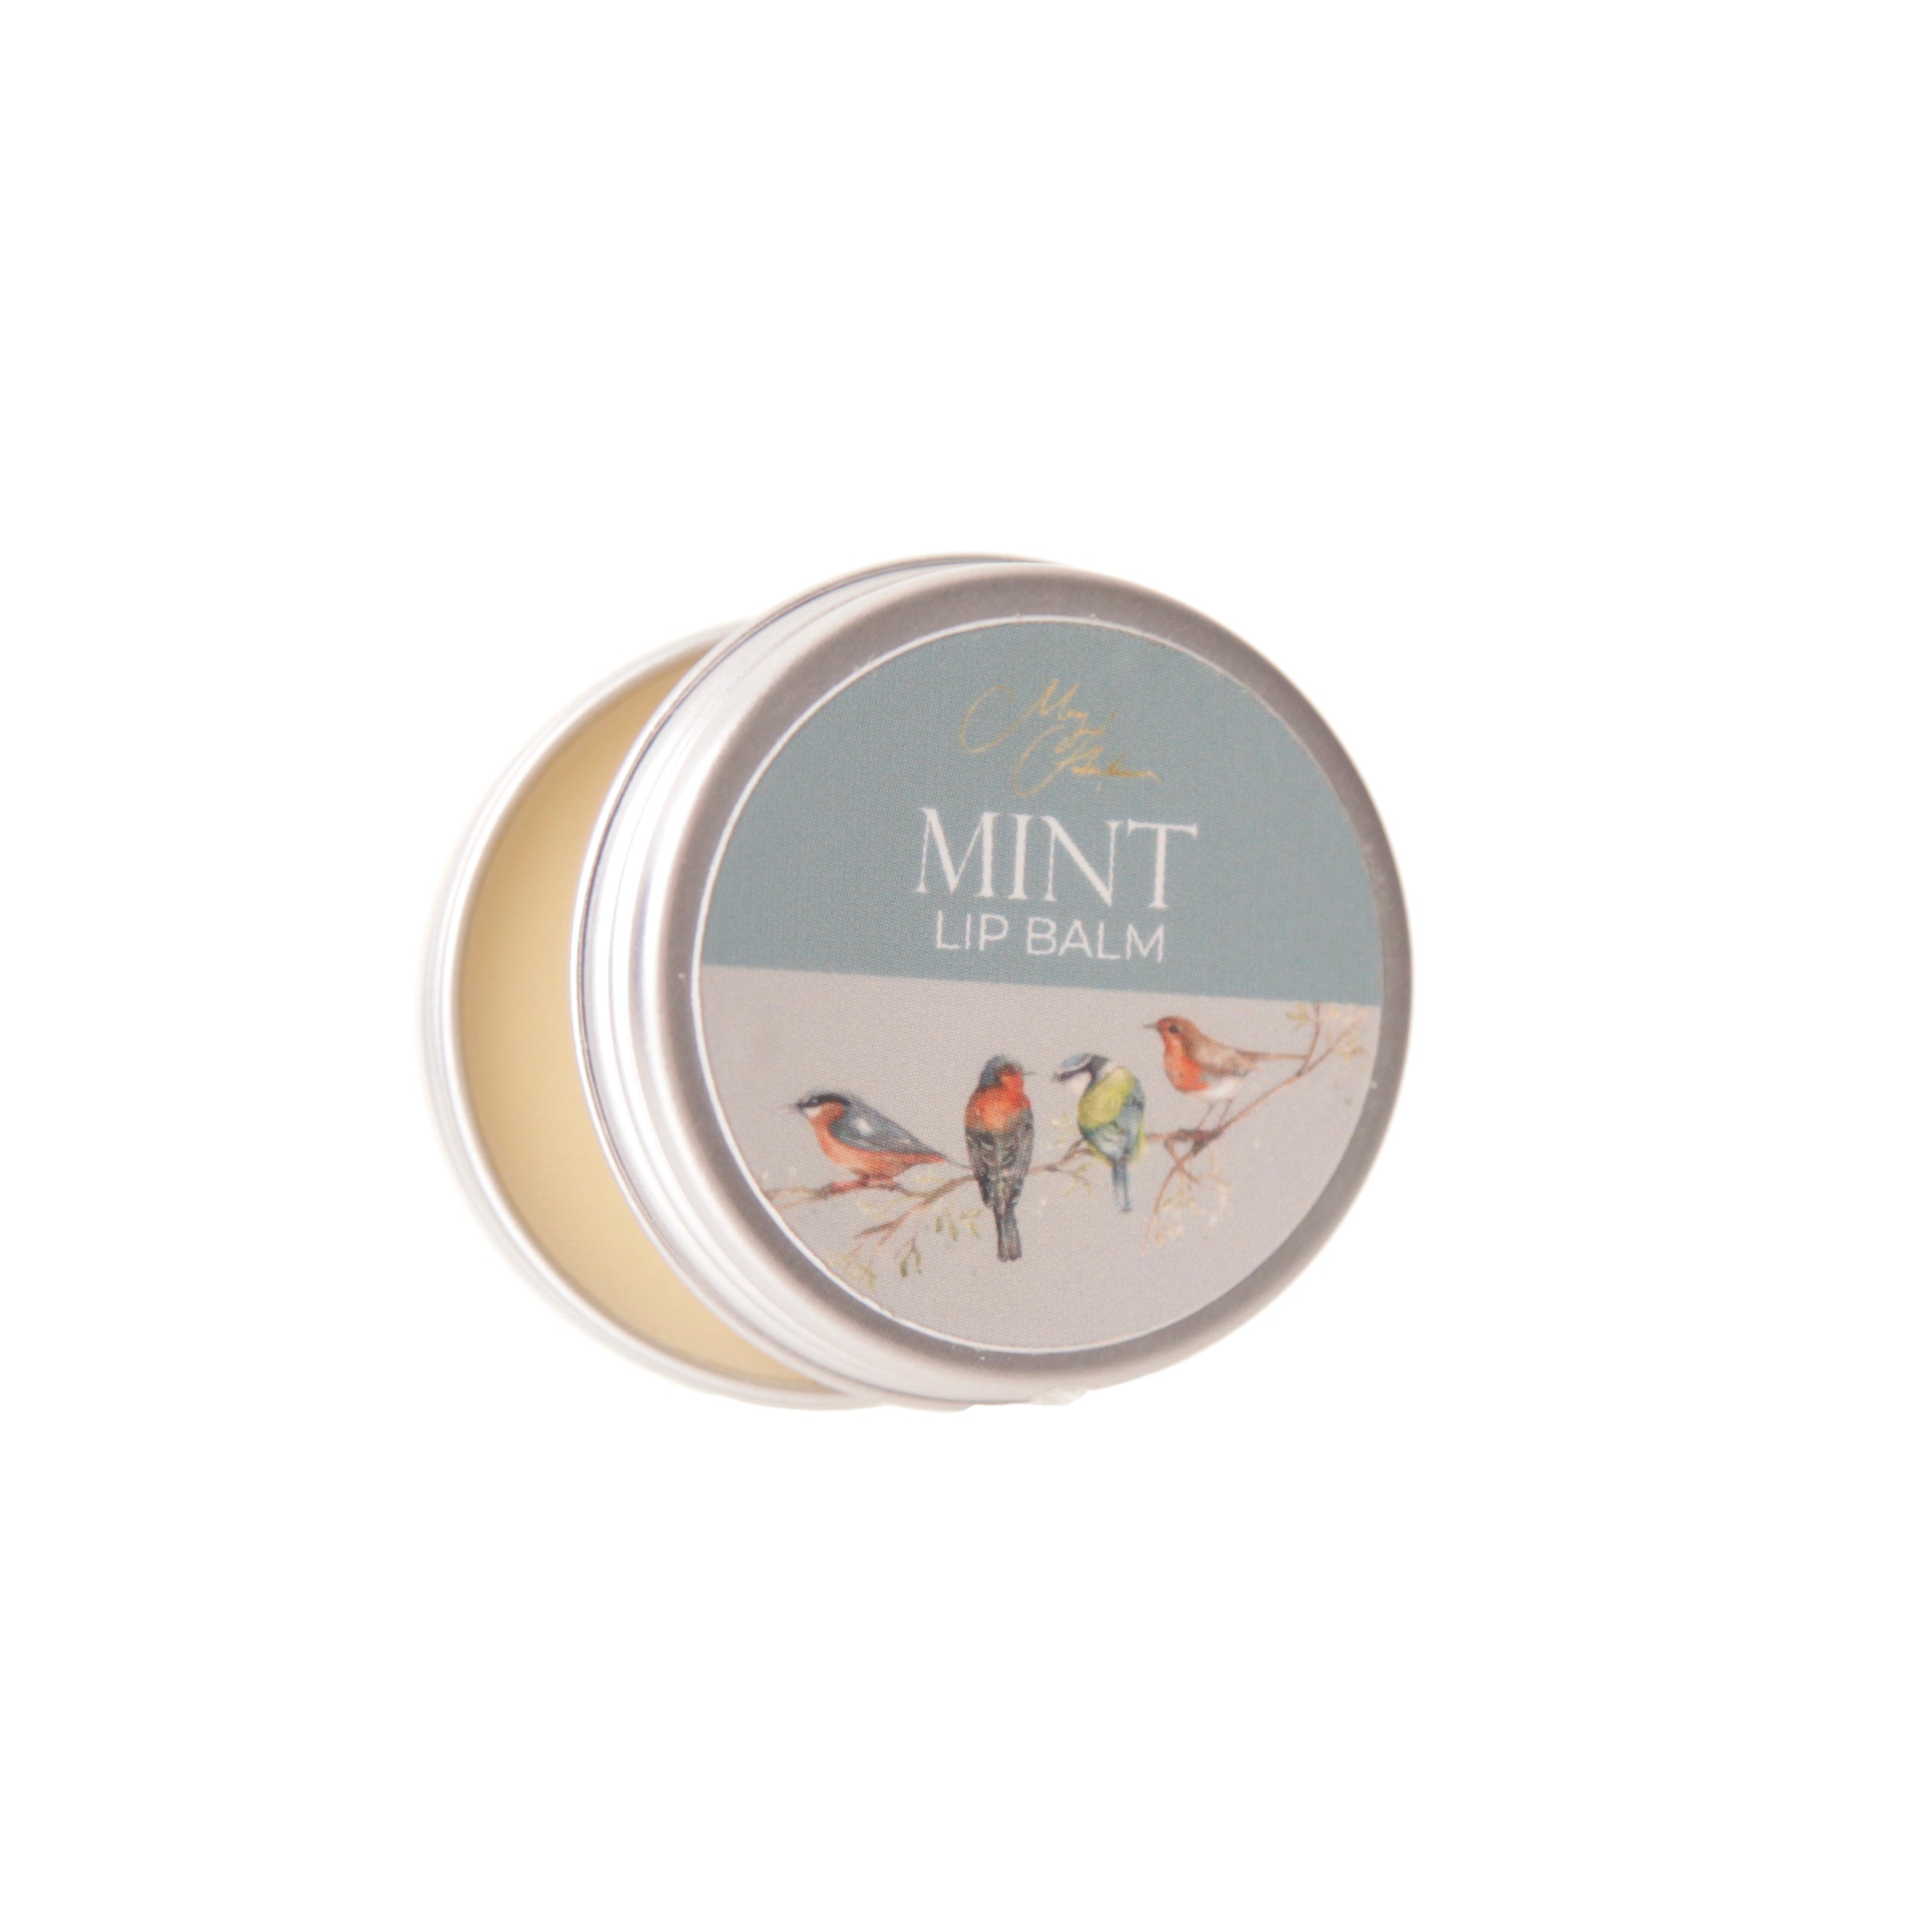 Mint Lip Balm With 'The Lookout' British Birds Design